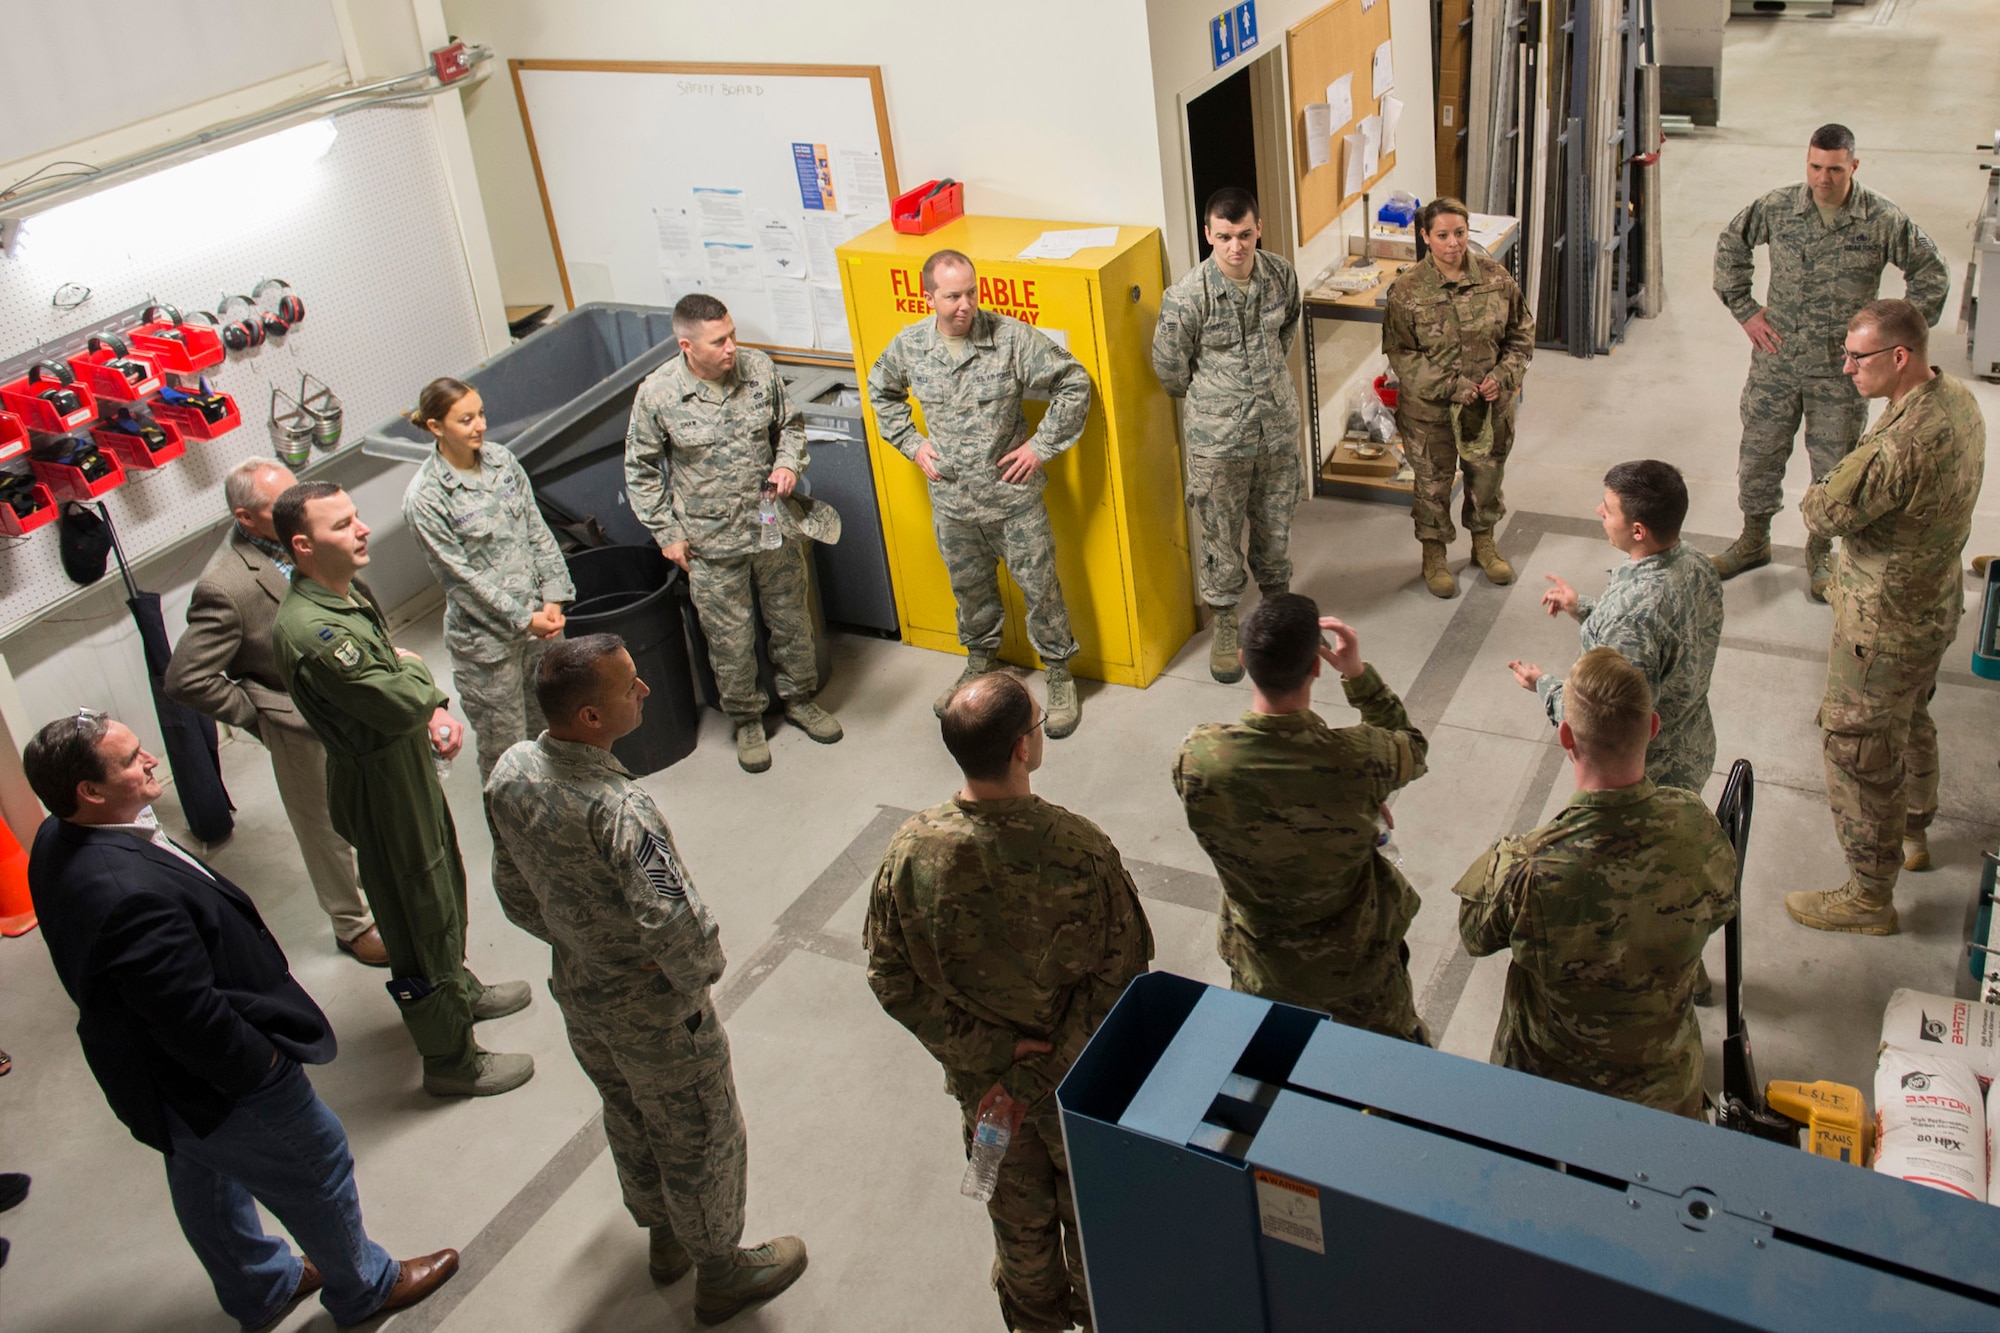 Finalists from the 2019 Air Force Spark Tank competition visited the Air Force Technical Applications Center here March 1, 2019 to meet with members of the center’s Innovation Lab and observe how failure has led to success for the nuclear treaty monitoring organization, headquartered at Patrick Air Force Base, Florida. (U.S. Air Force photo by Matthew S. Jurgens)